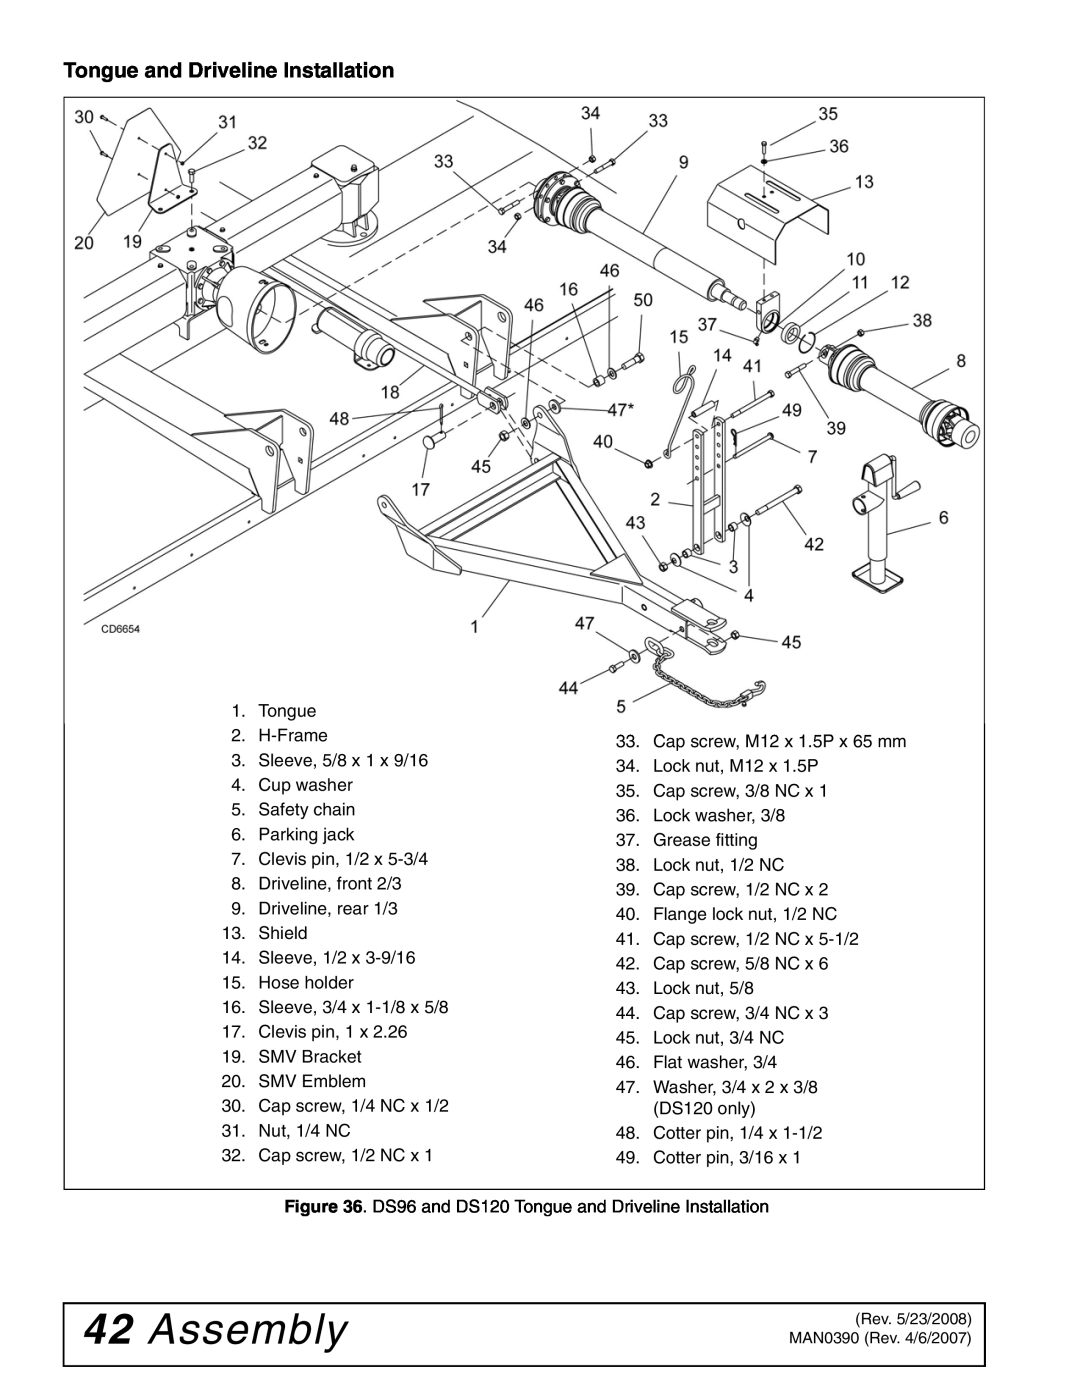 Woods Equipment DS96, DS120 manual Assembly, Tongue and Driveline Installation 